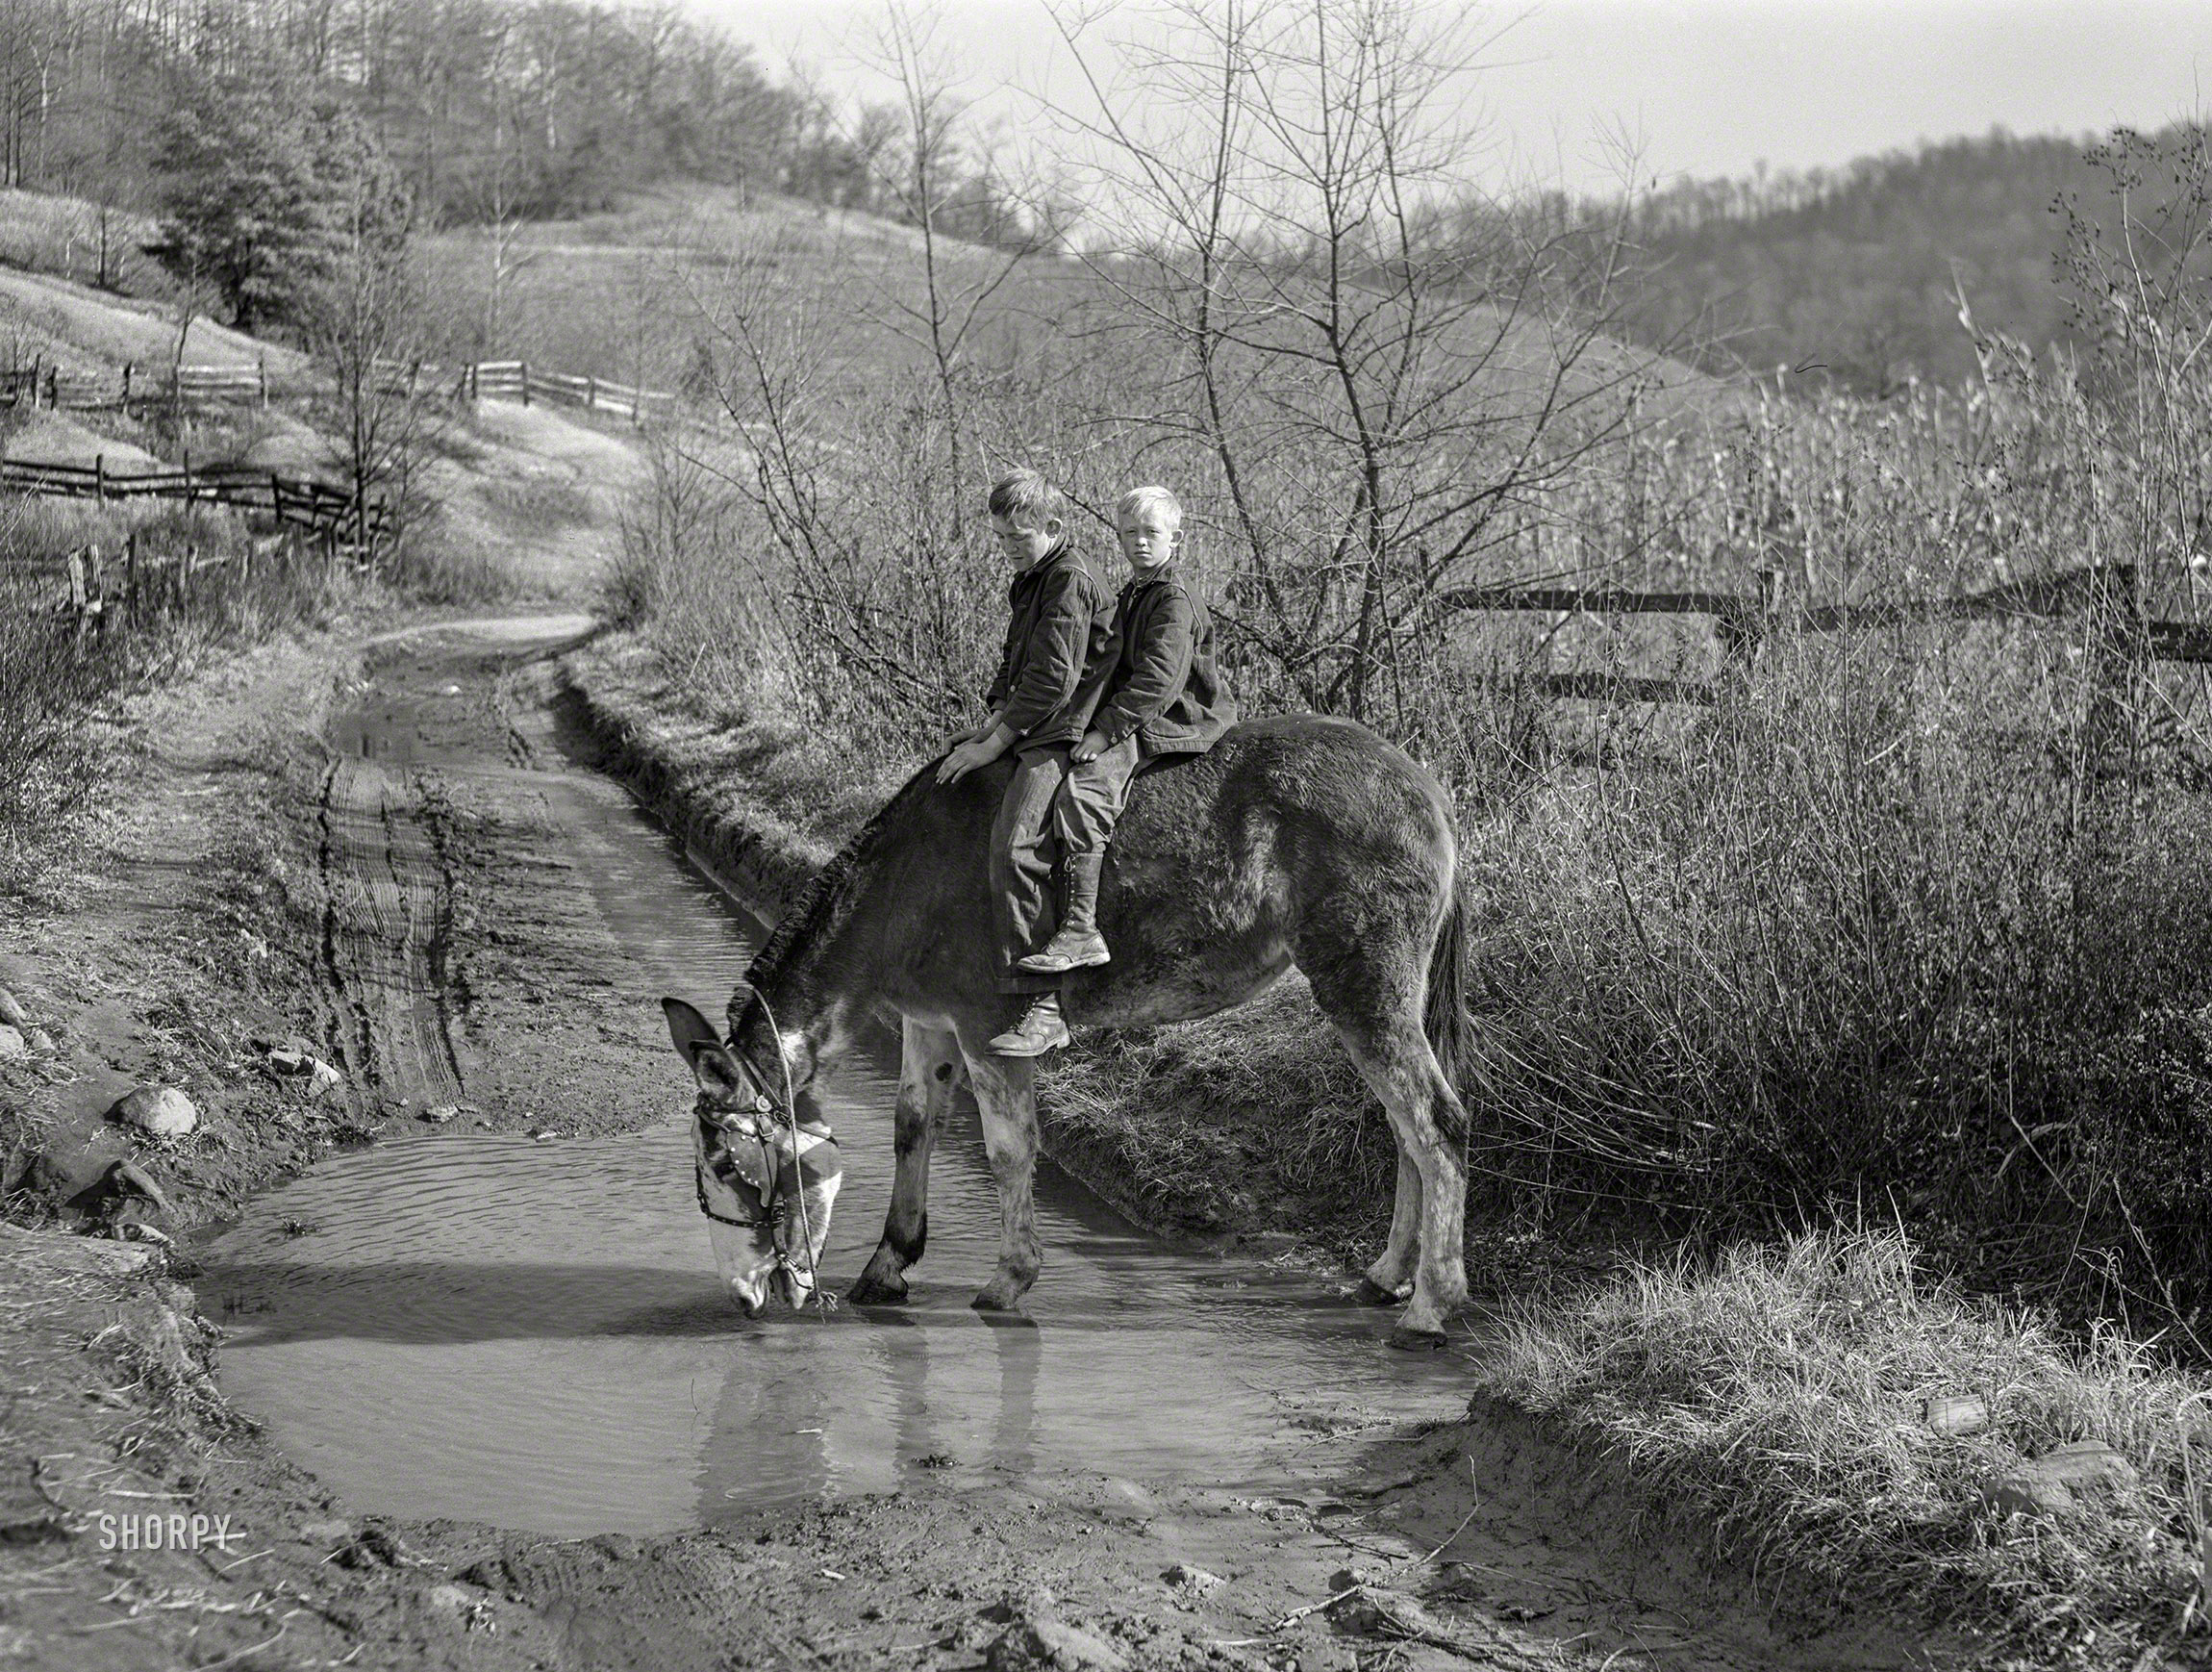 November 1940. "Two of Dutton ('Dut') Calleb's sons watering the mule. Southern Appalachian Project near Barbourville, Knox County, Kentucky." Medium format acetate negative by Marion Post Wolcott for the Farm Security Administration. View full size.